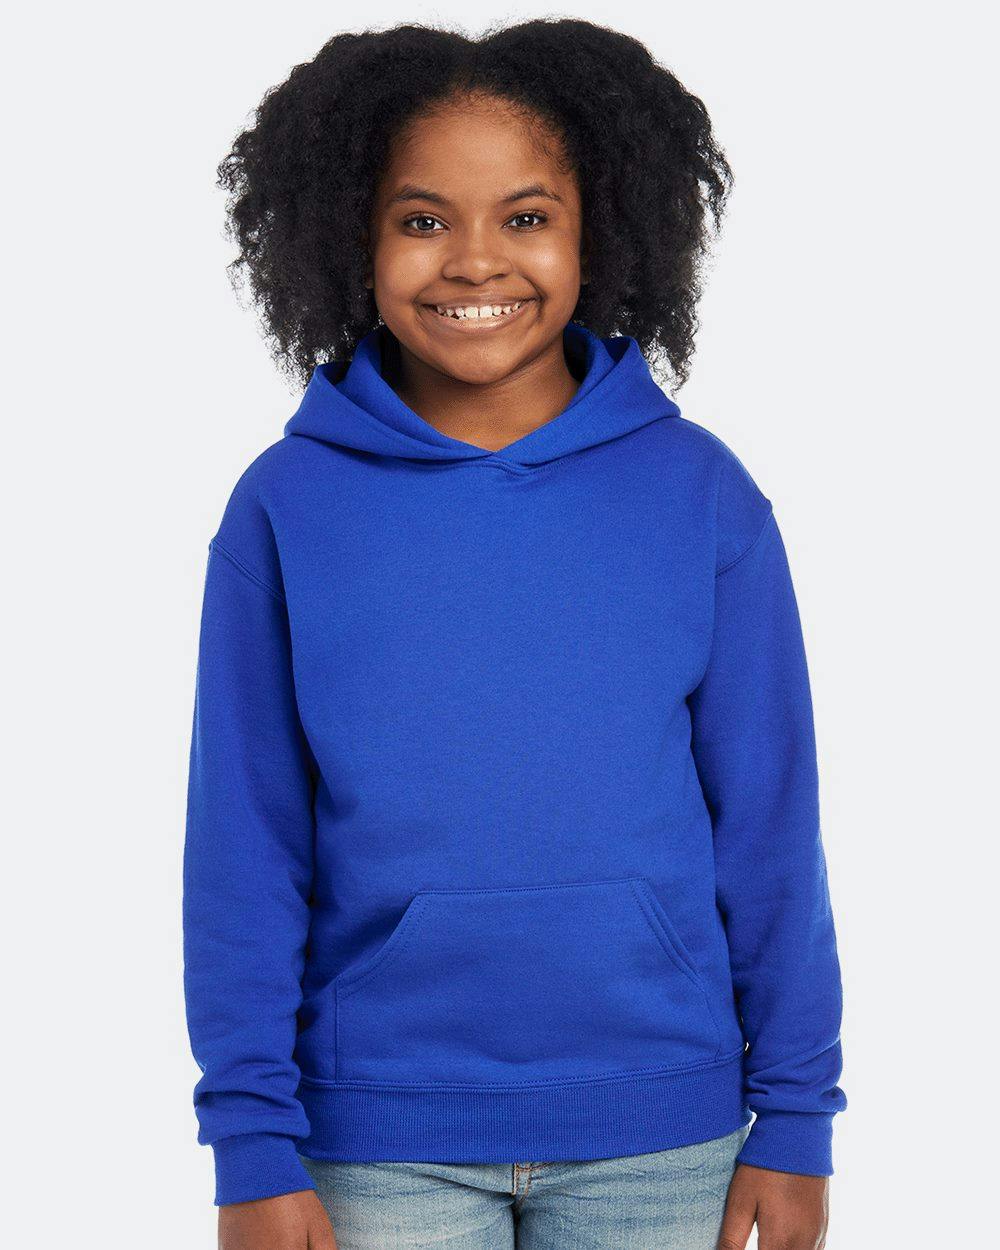 Image for NuBlend® Youth Hooded Sweatshirt - 996YR